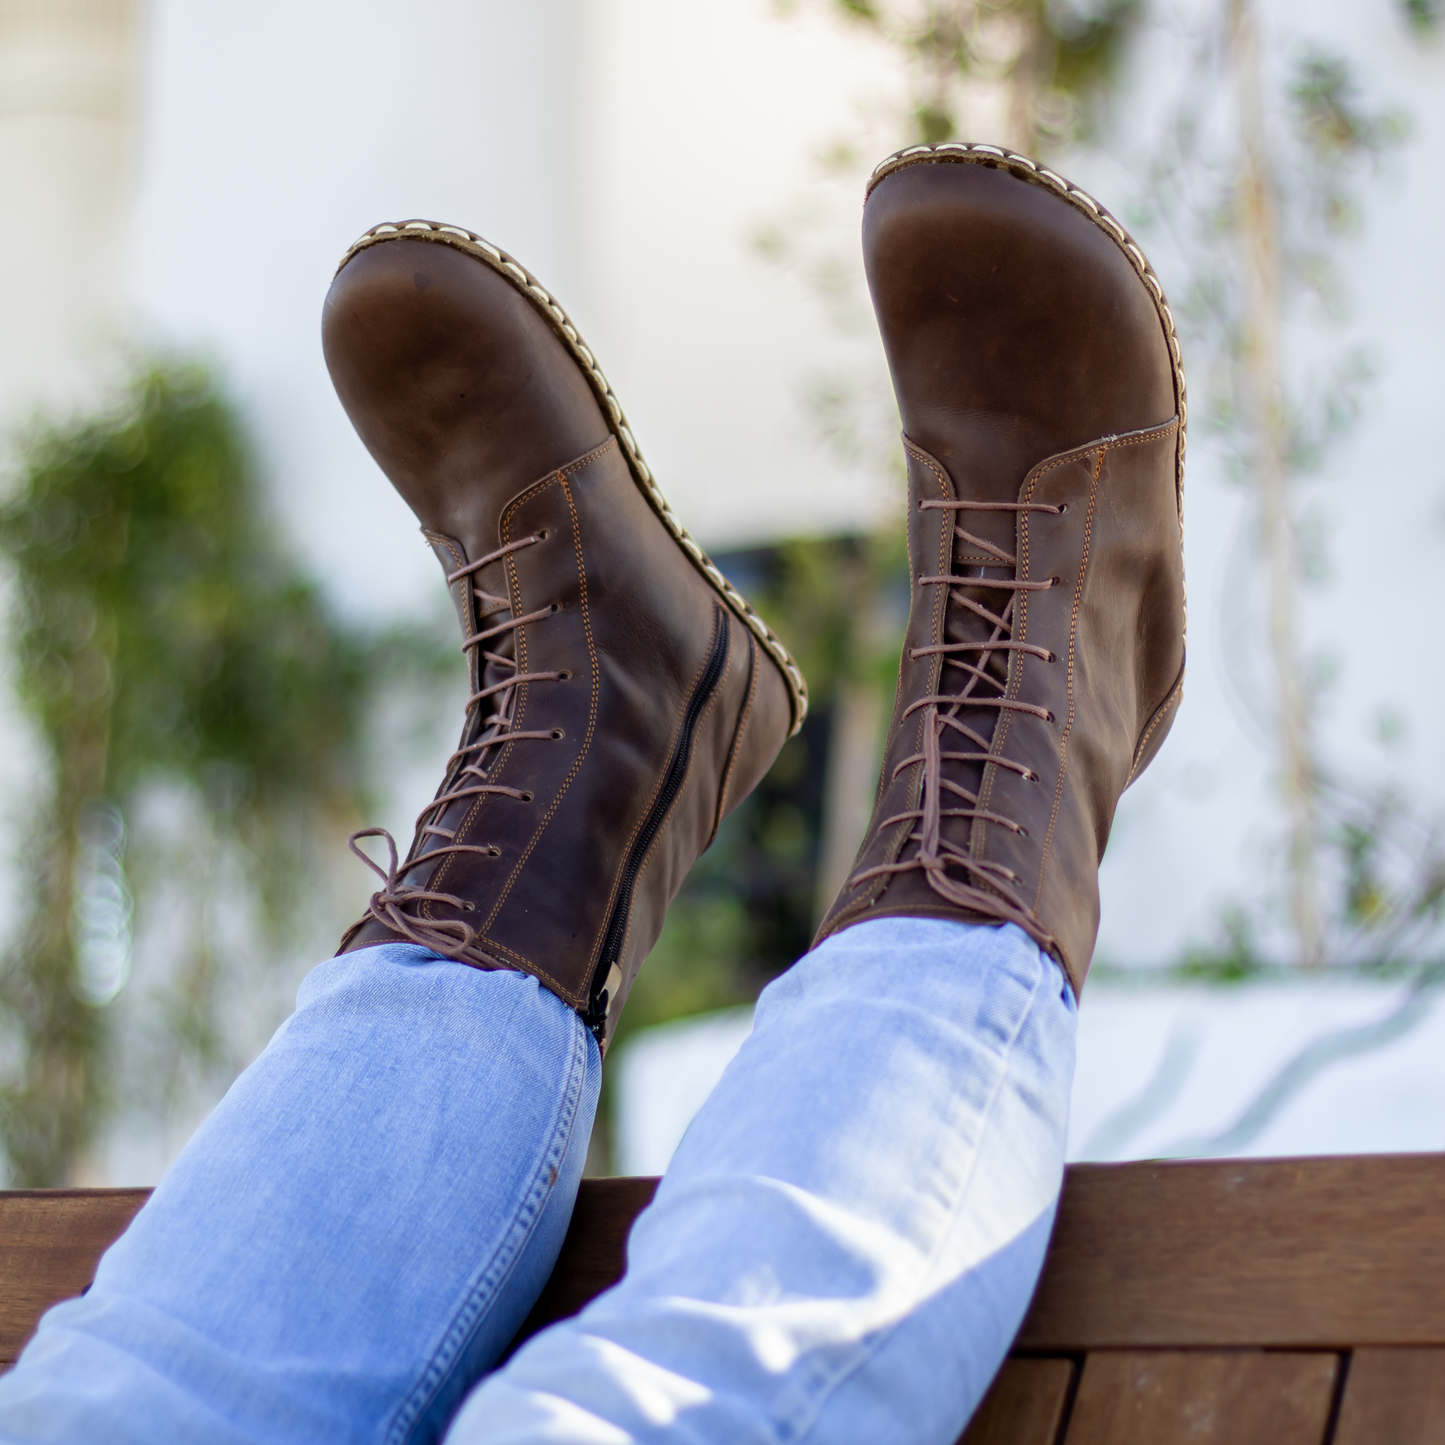 Men Brown Leather Handmade Boot | Barefoot Men Boot | Earthing Leather Boots | Grounding Copper Rivet | Crazy Classic Brown